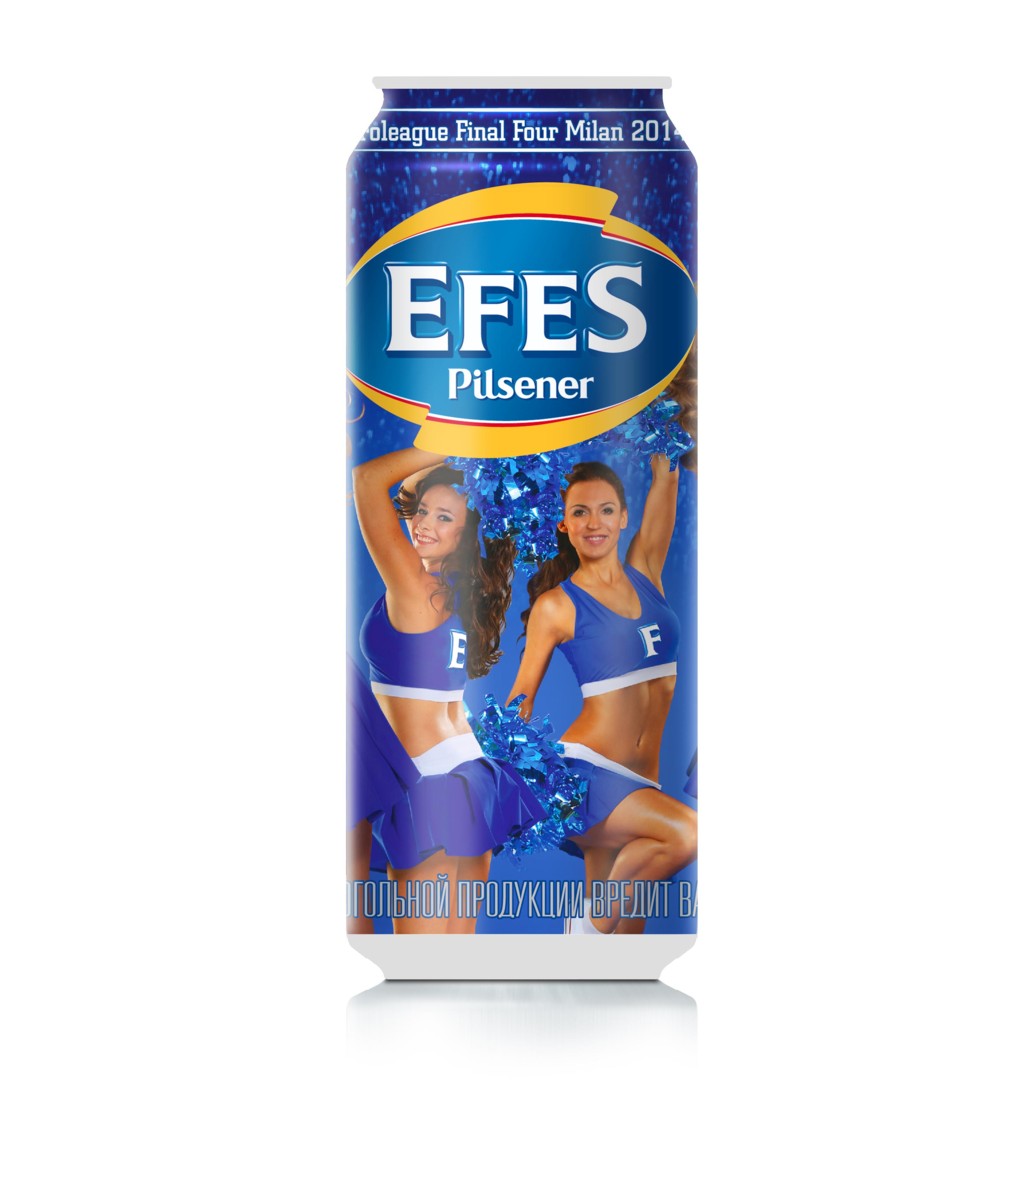 Rexam, Efes Rus to Develop Limited Edition Beer Cans